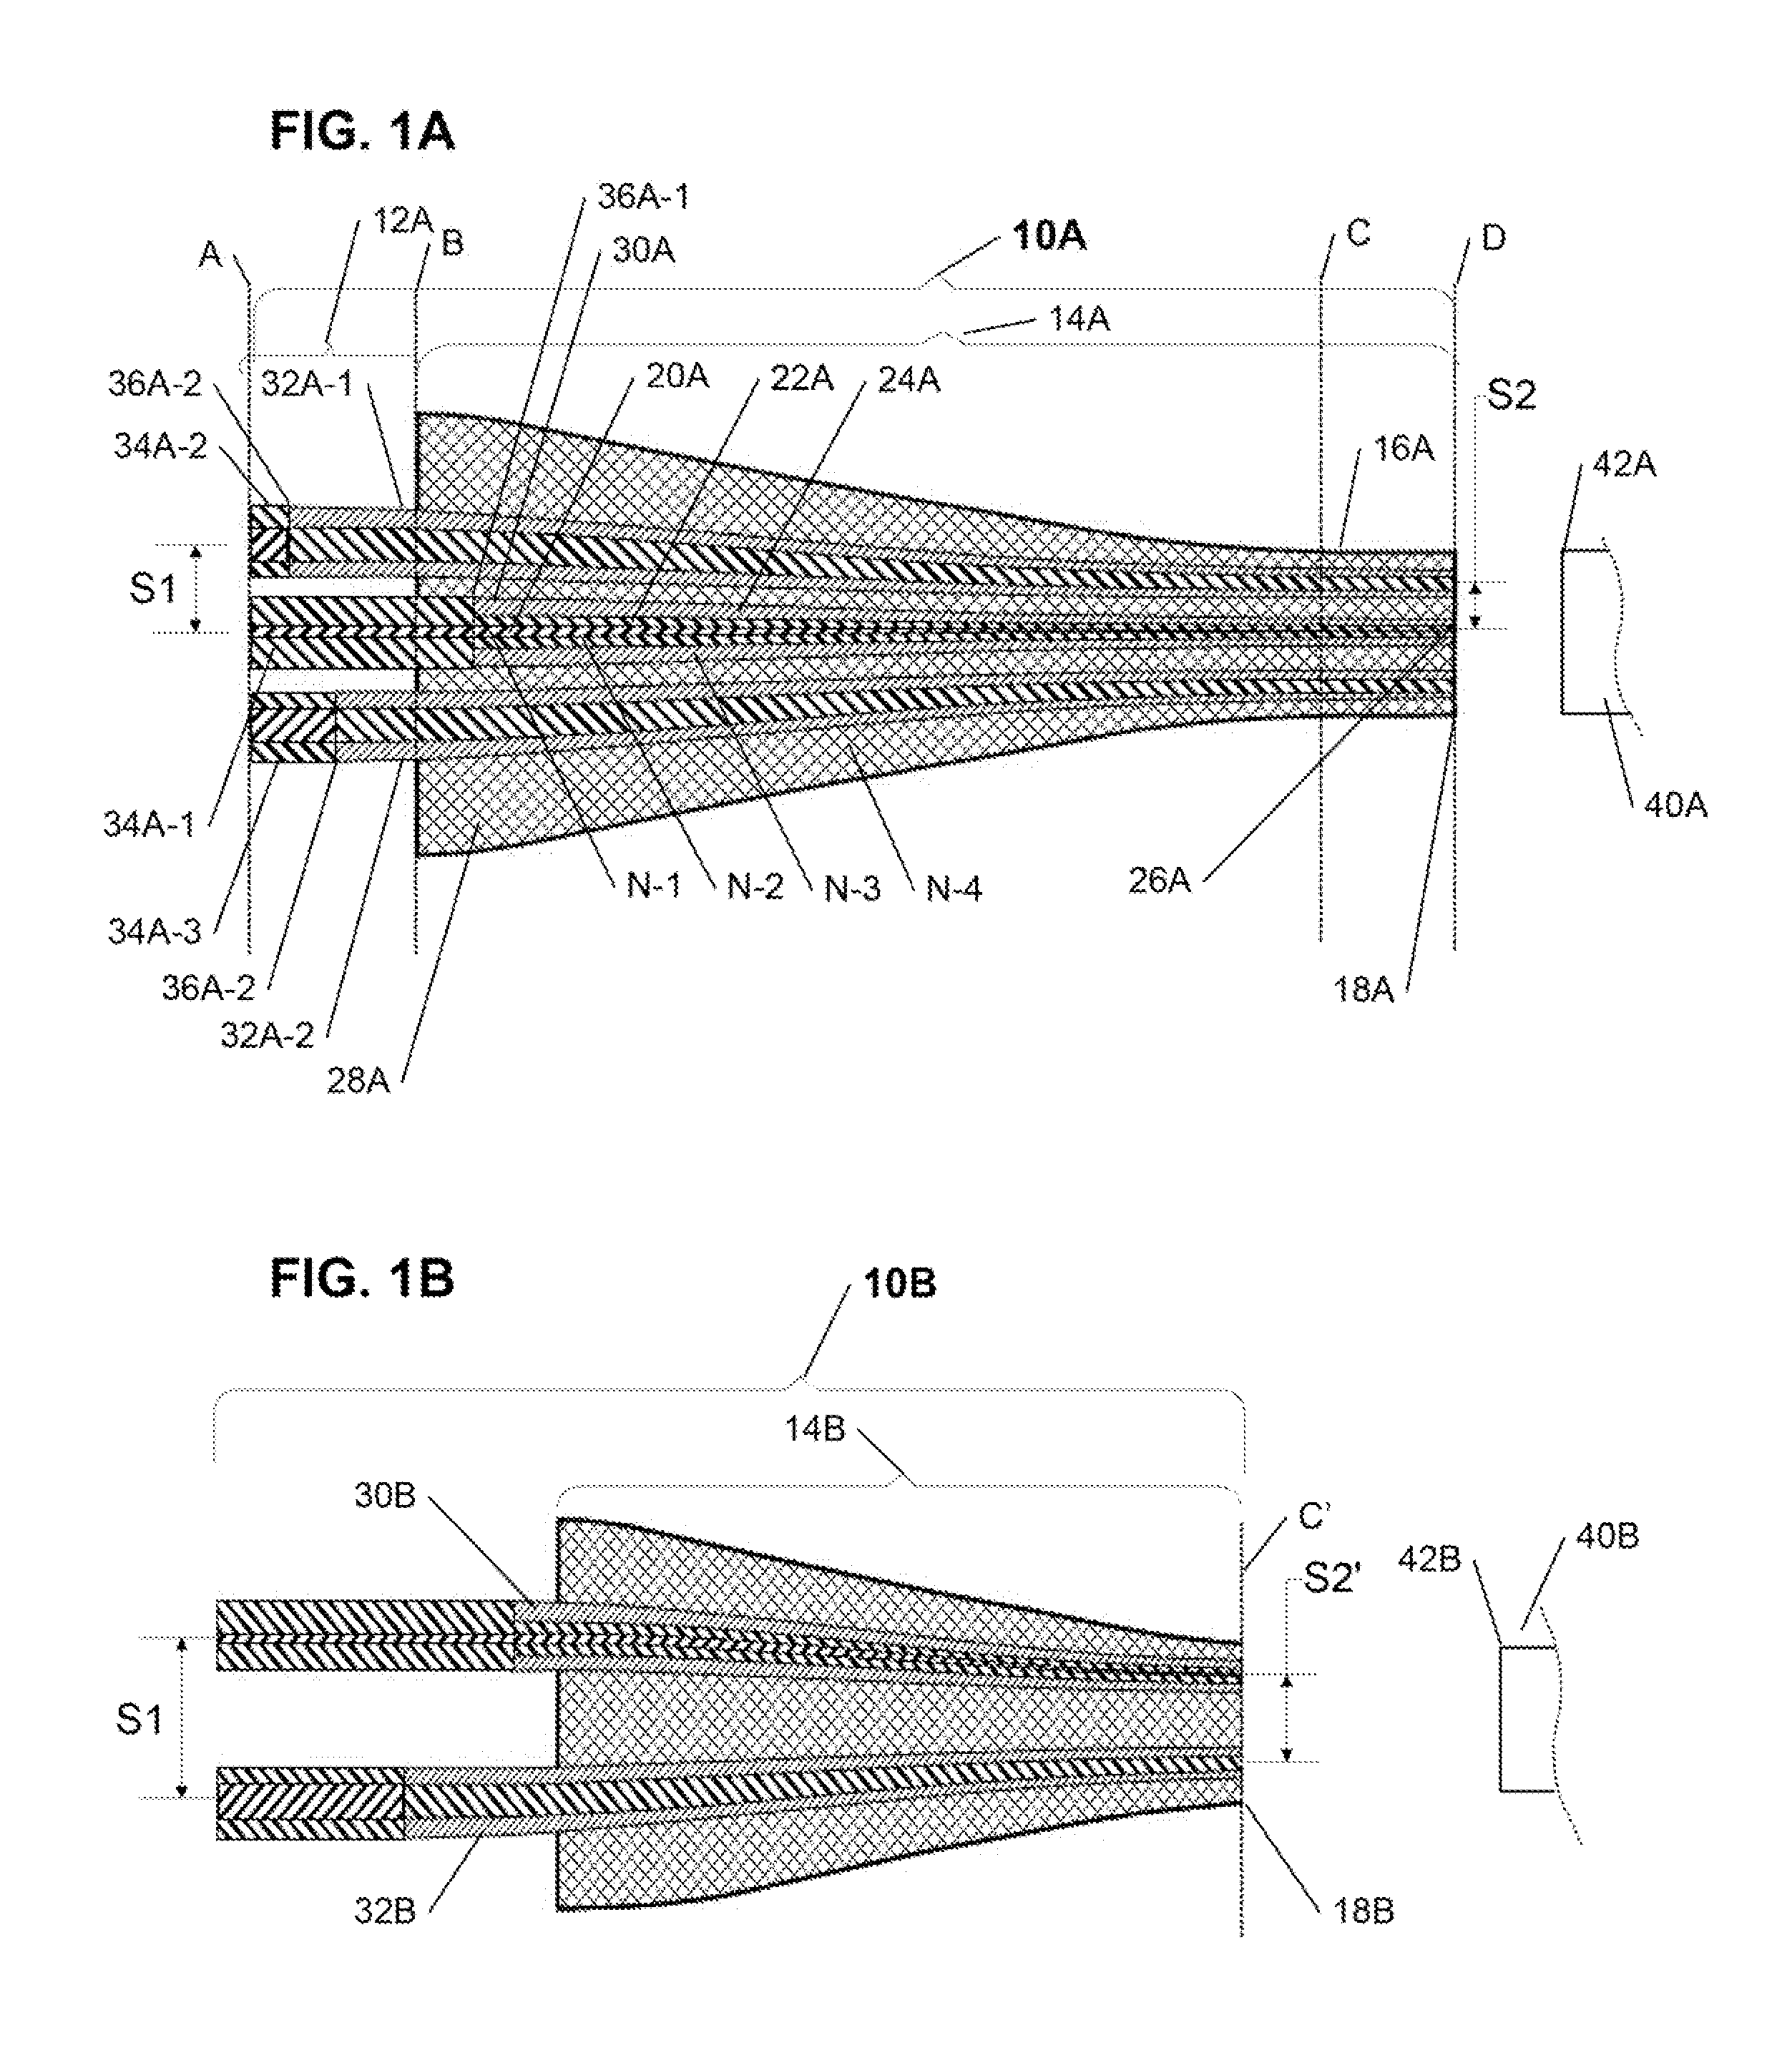 Optical component assembly for use with an optical device